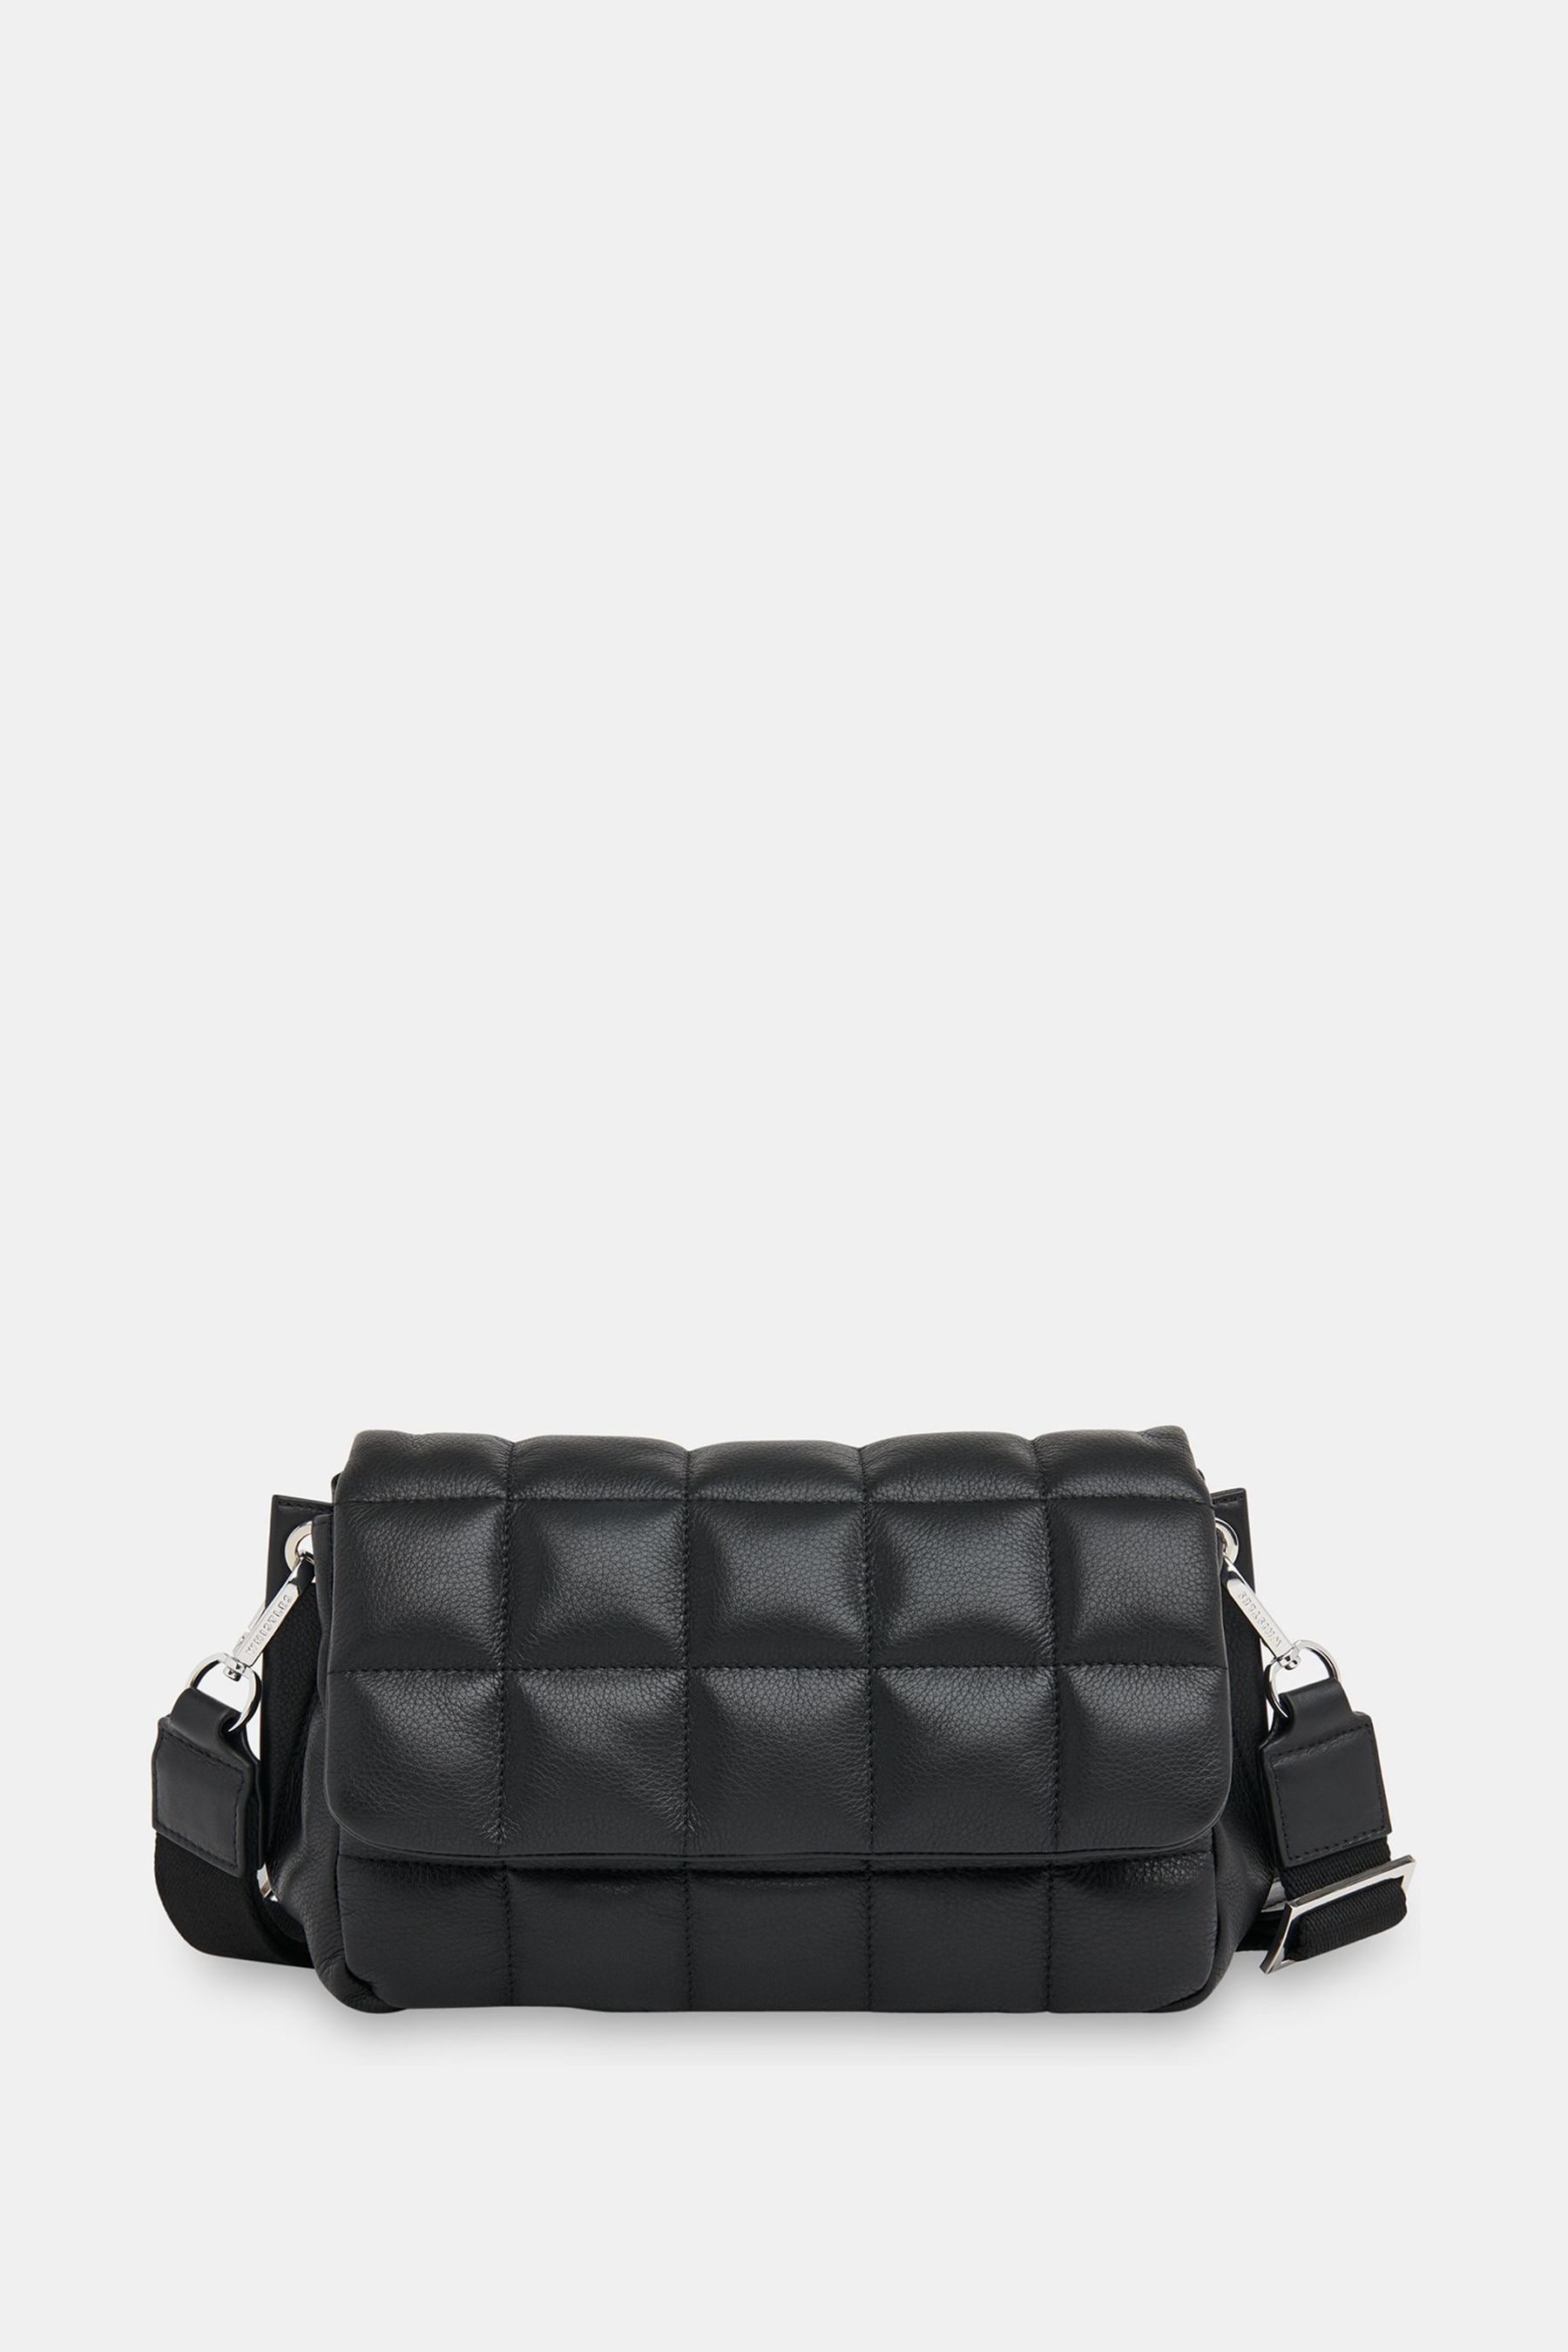 Buy Whistles Ellis Quilted Cross-Body Black Bag from the Next UK online ...